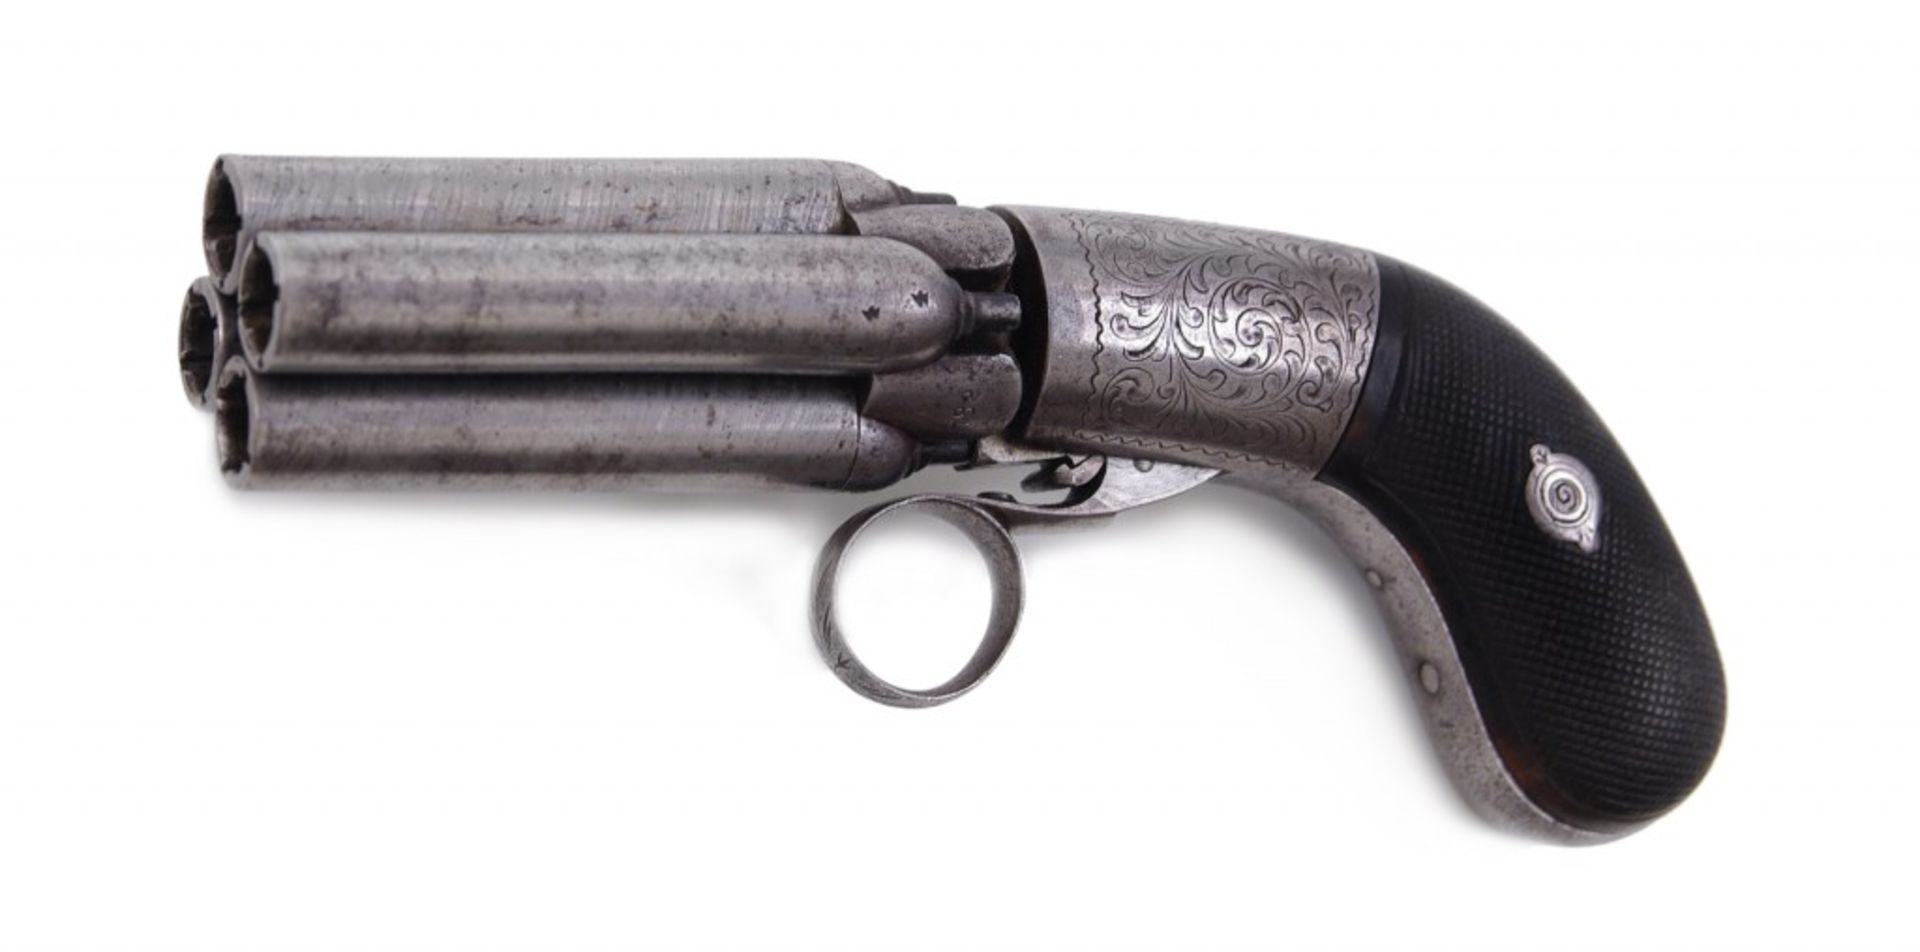 A four-shot pepperbox pistol - Image 3 of 3